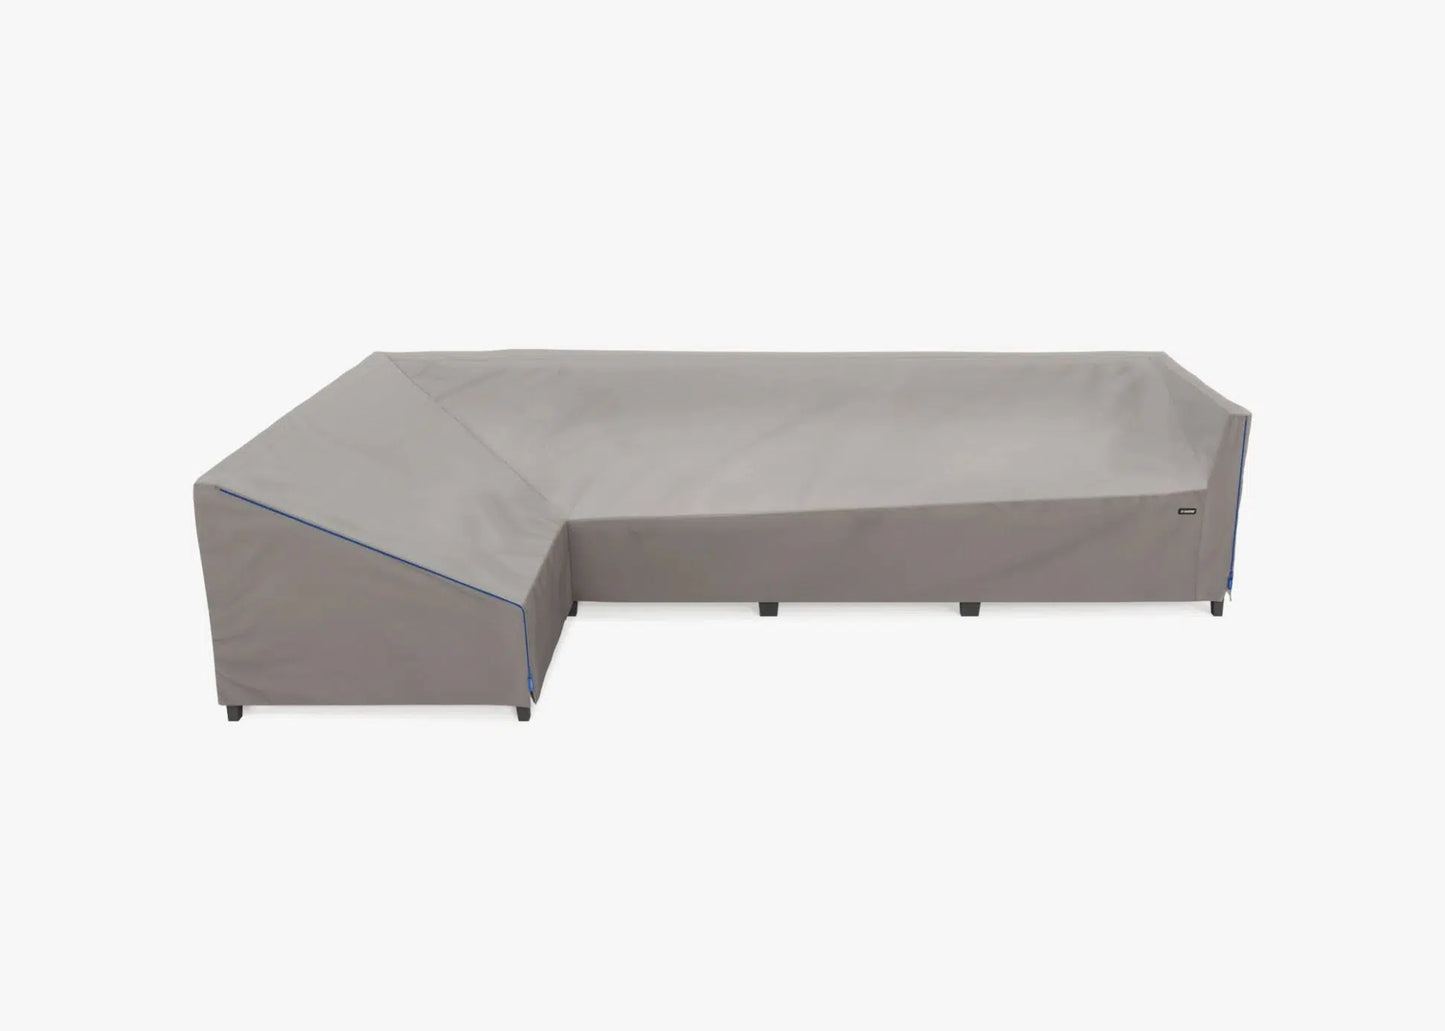 Live Outer Cover for Aluminum Right Side L Sectional 5-Seat